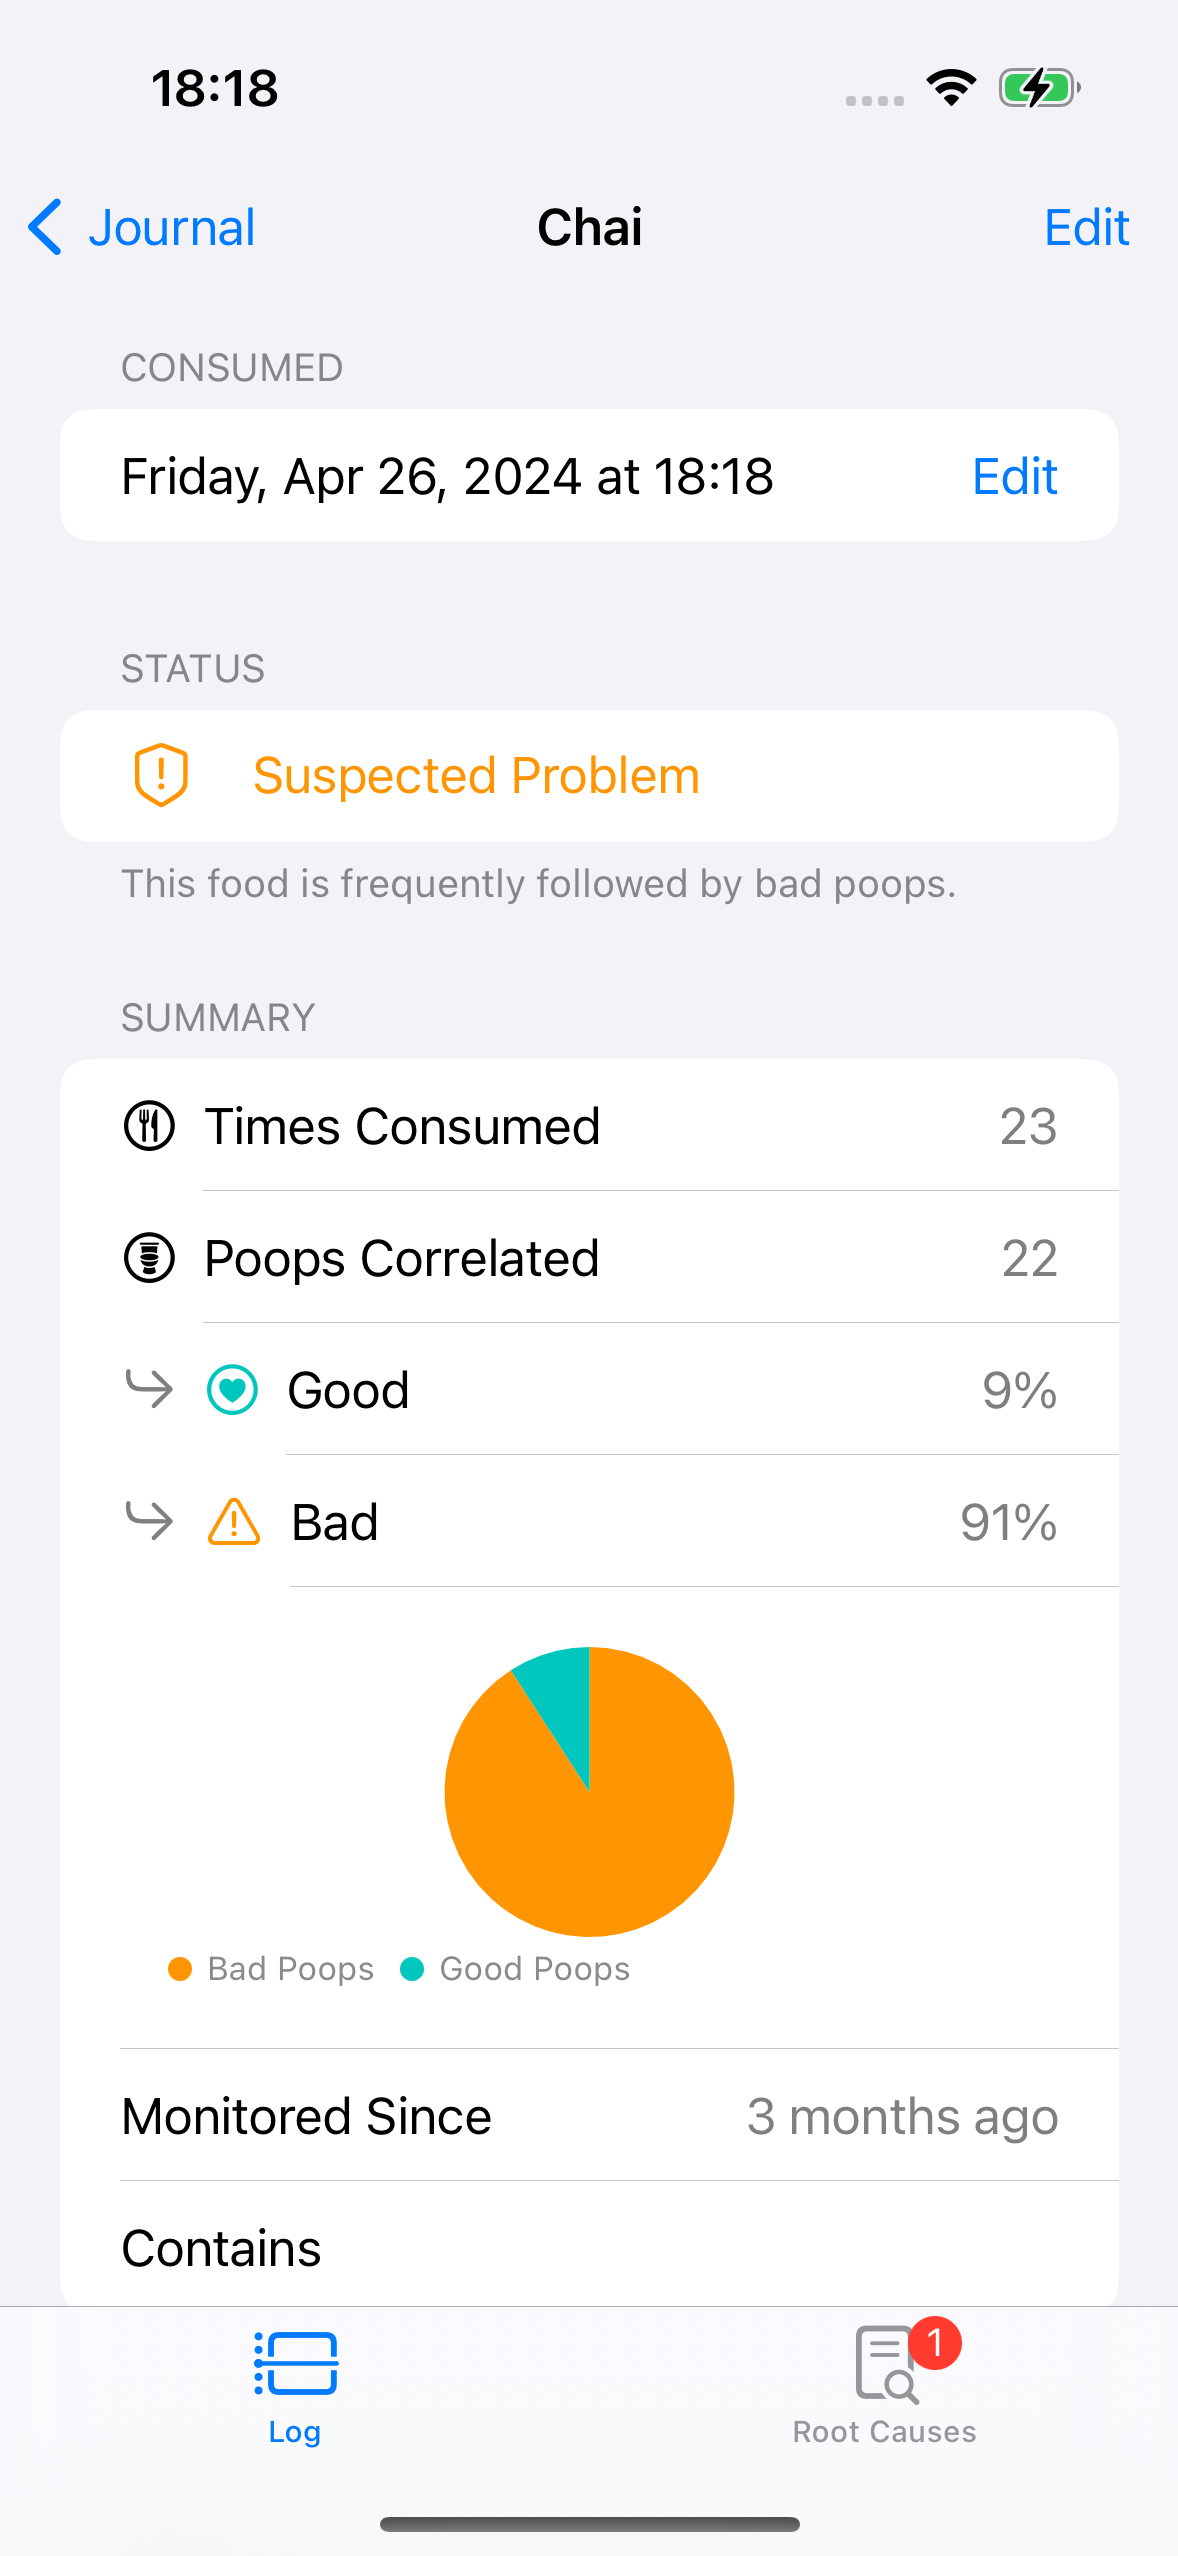 A screenshot of Brown Note showing how a specific food, chai in this case, impacts poops, including percentages of good vs. bad poops that come after.